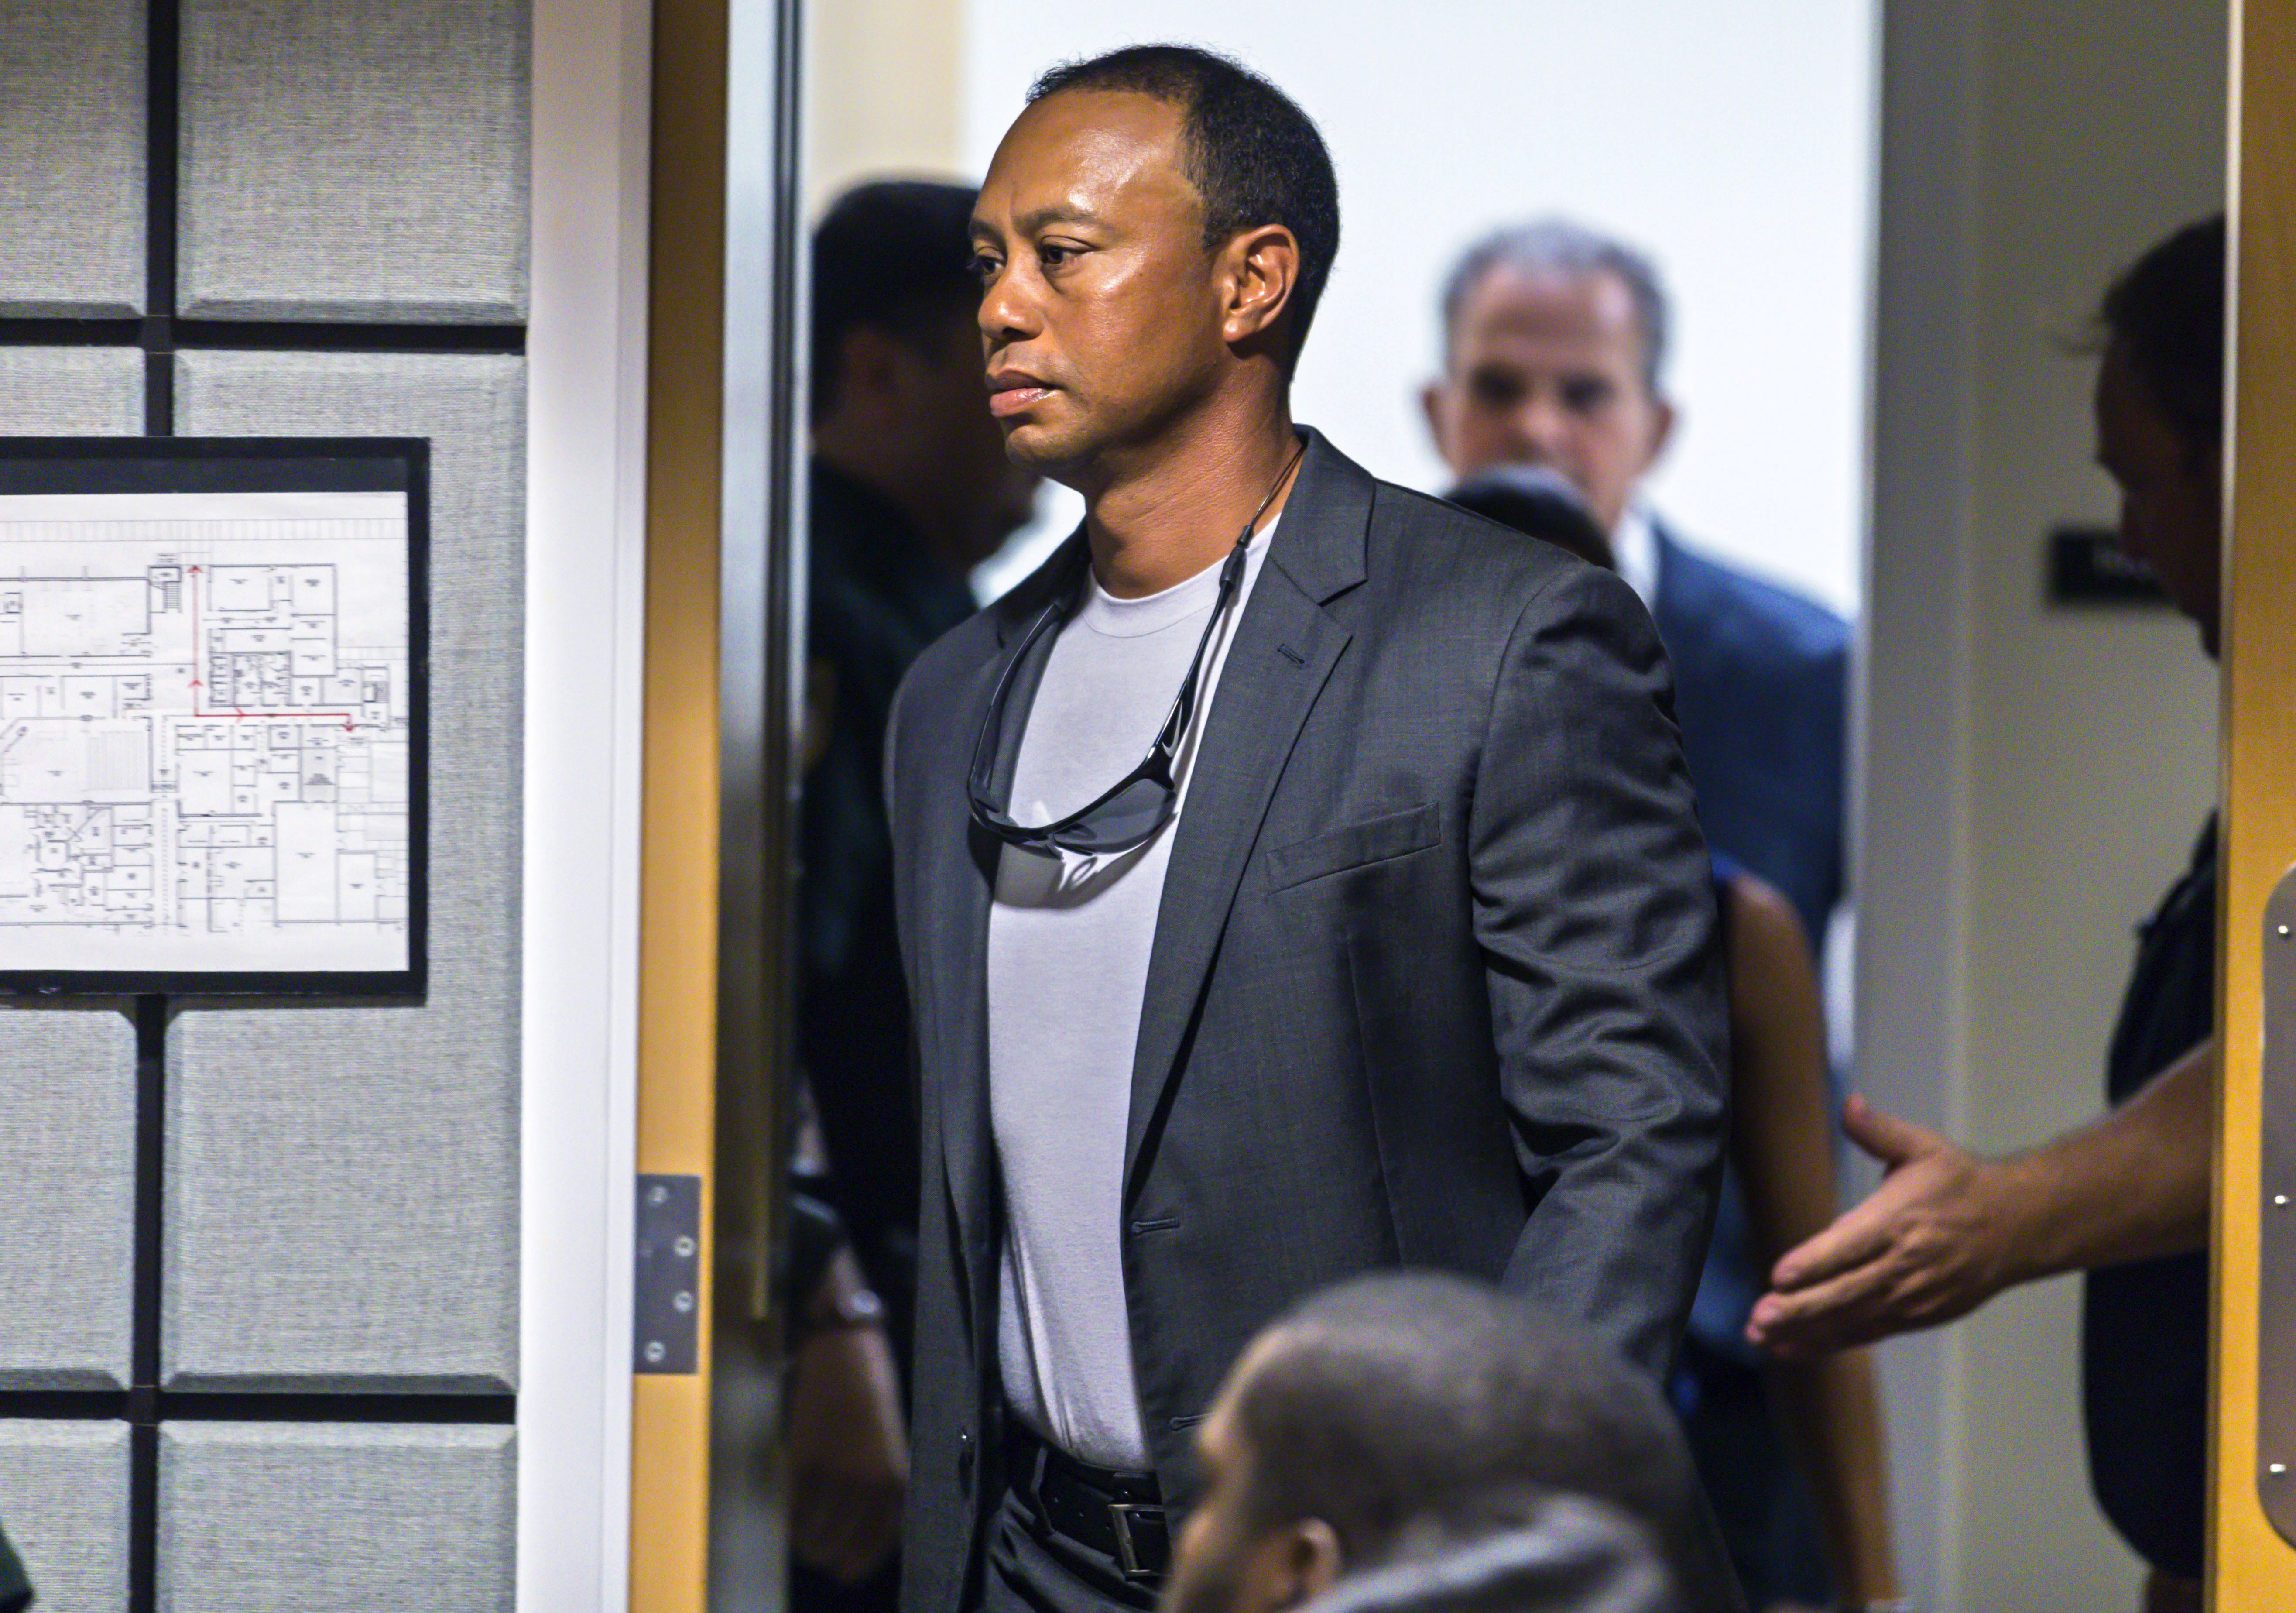 Tiger Woods entering Palm Beach County court on October 27, 2017 in Palm Beach Gardens, Florida. / Source: Getty Images